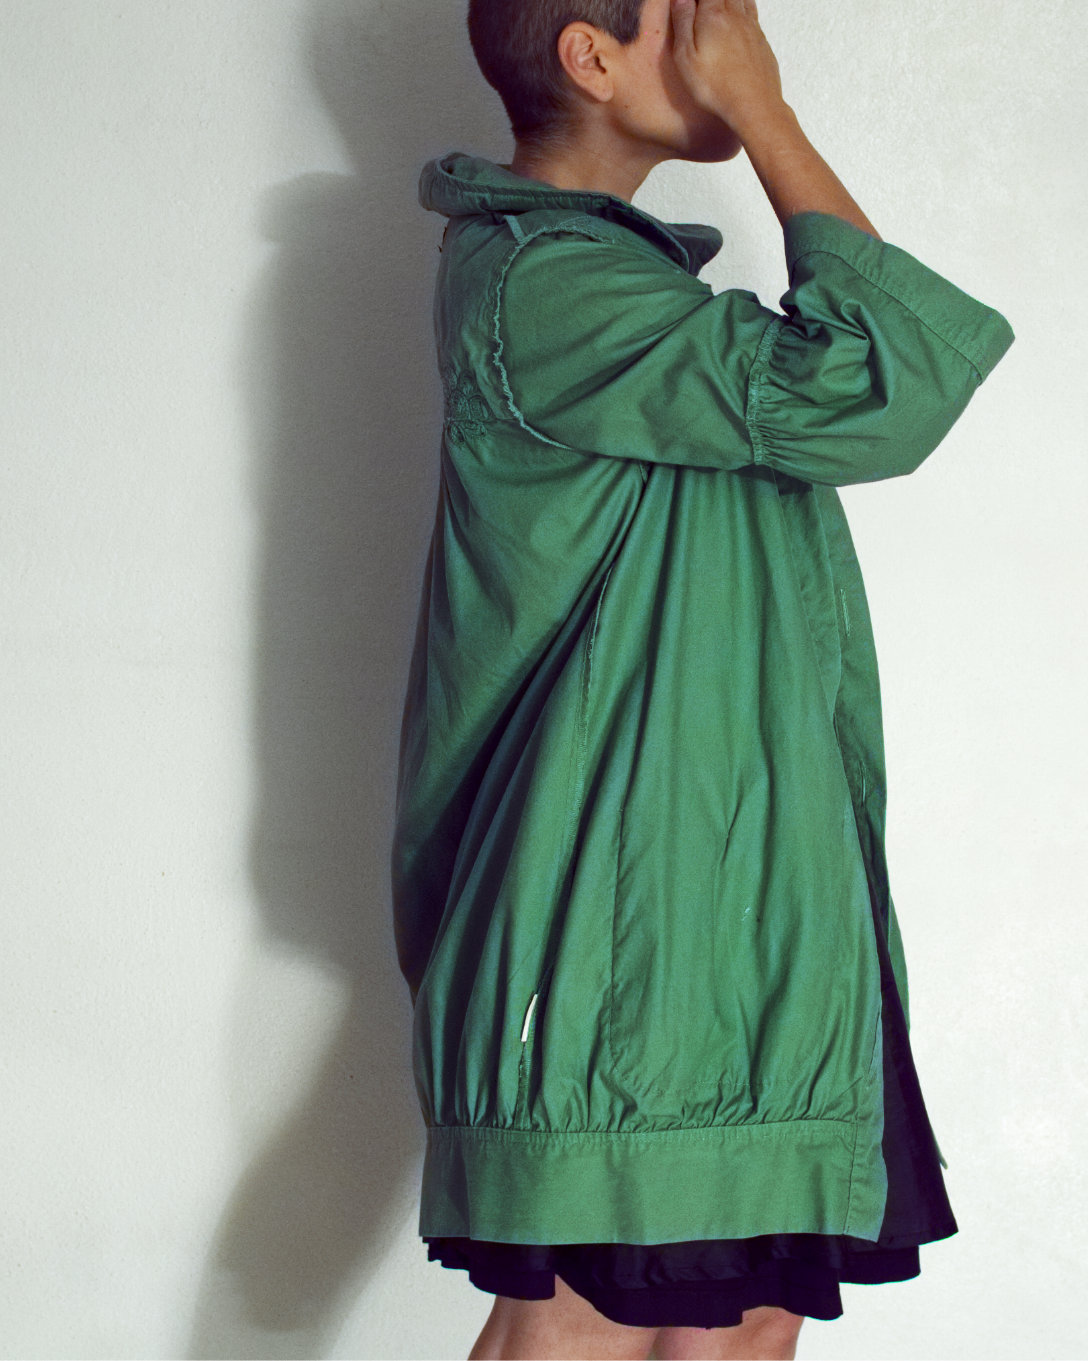 Model wears a green light coat, side view, coving their eyes